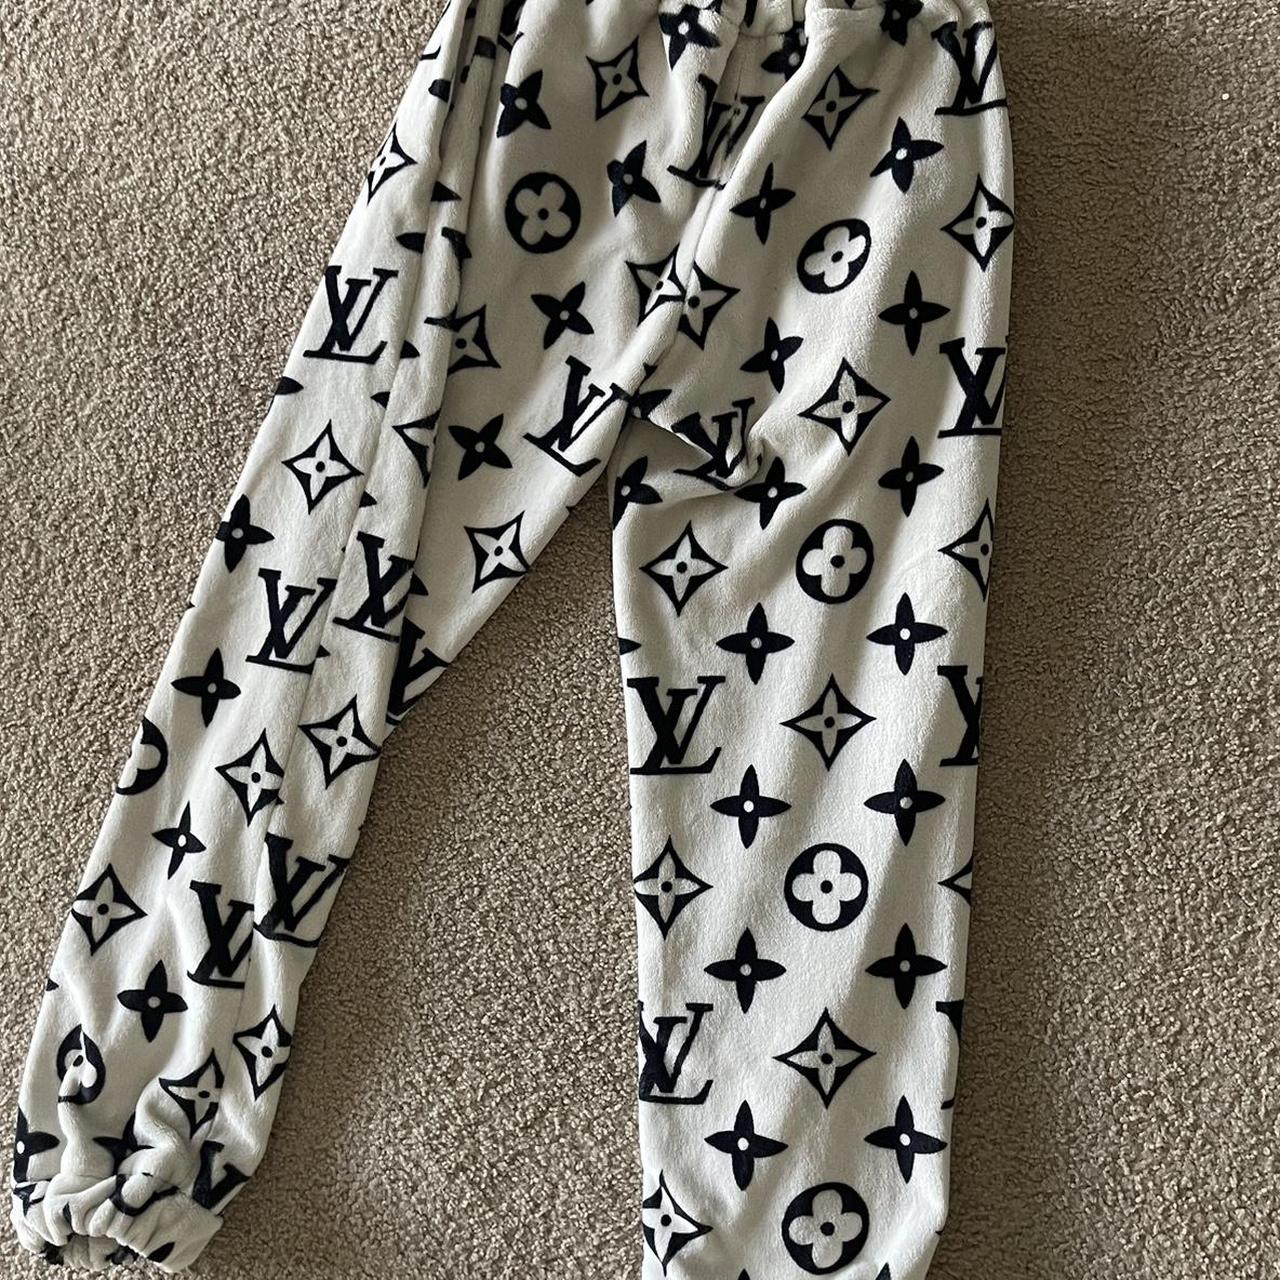 Fluffy LV tsuwoop sweatpants. Great condition with... - Depop